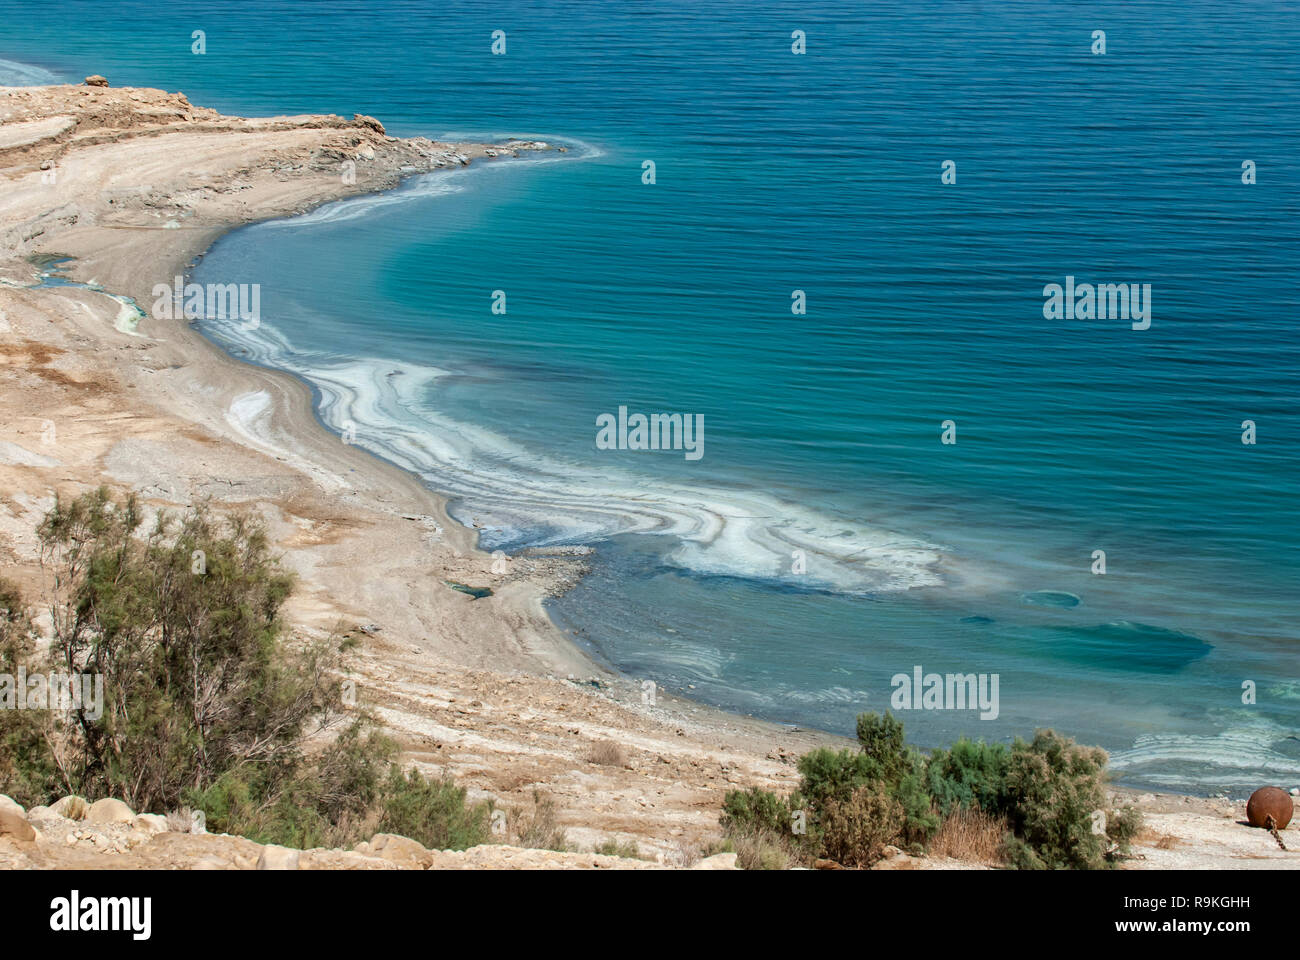 Elevated view of the shore of the Dead Sea, Israel Stock Photo